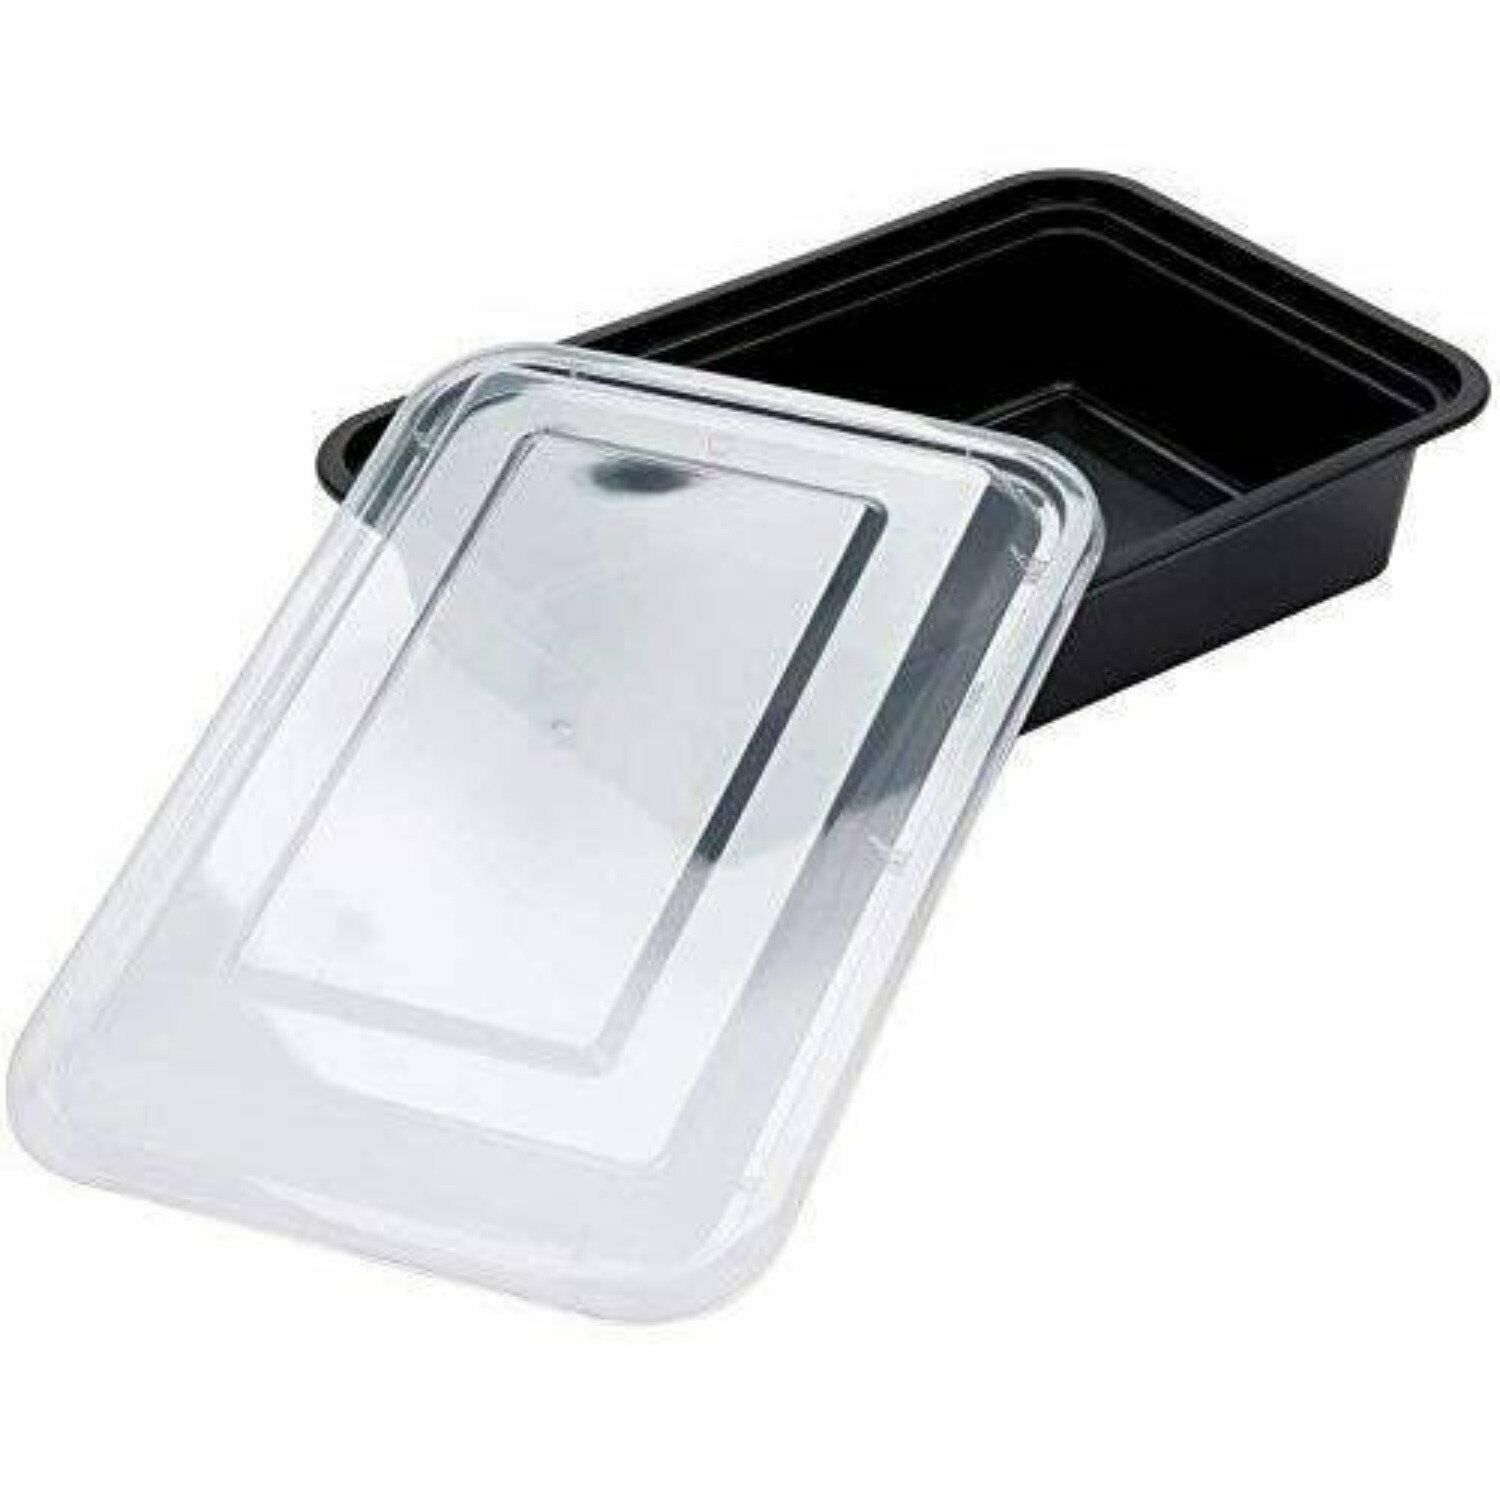 Meal Prep Containers - BPA Free - Plastic Food Storage Trays with Airt –  Fleur Foods